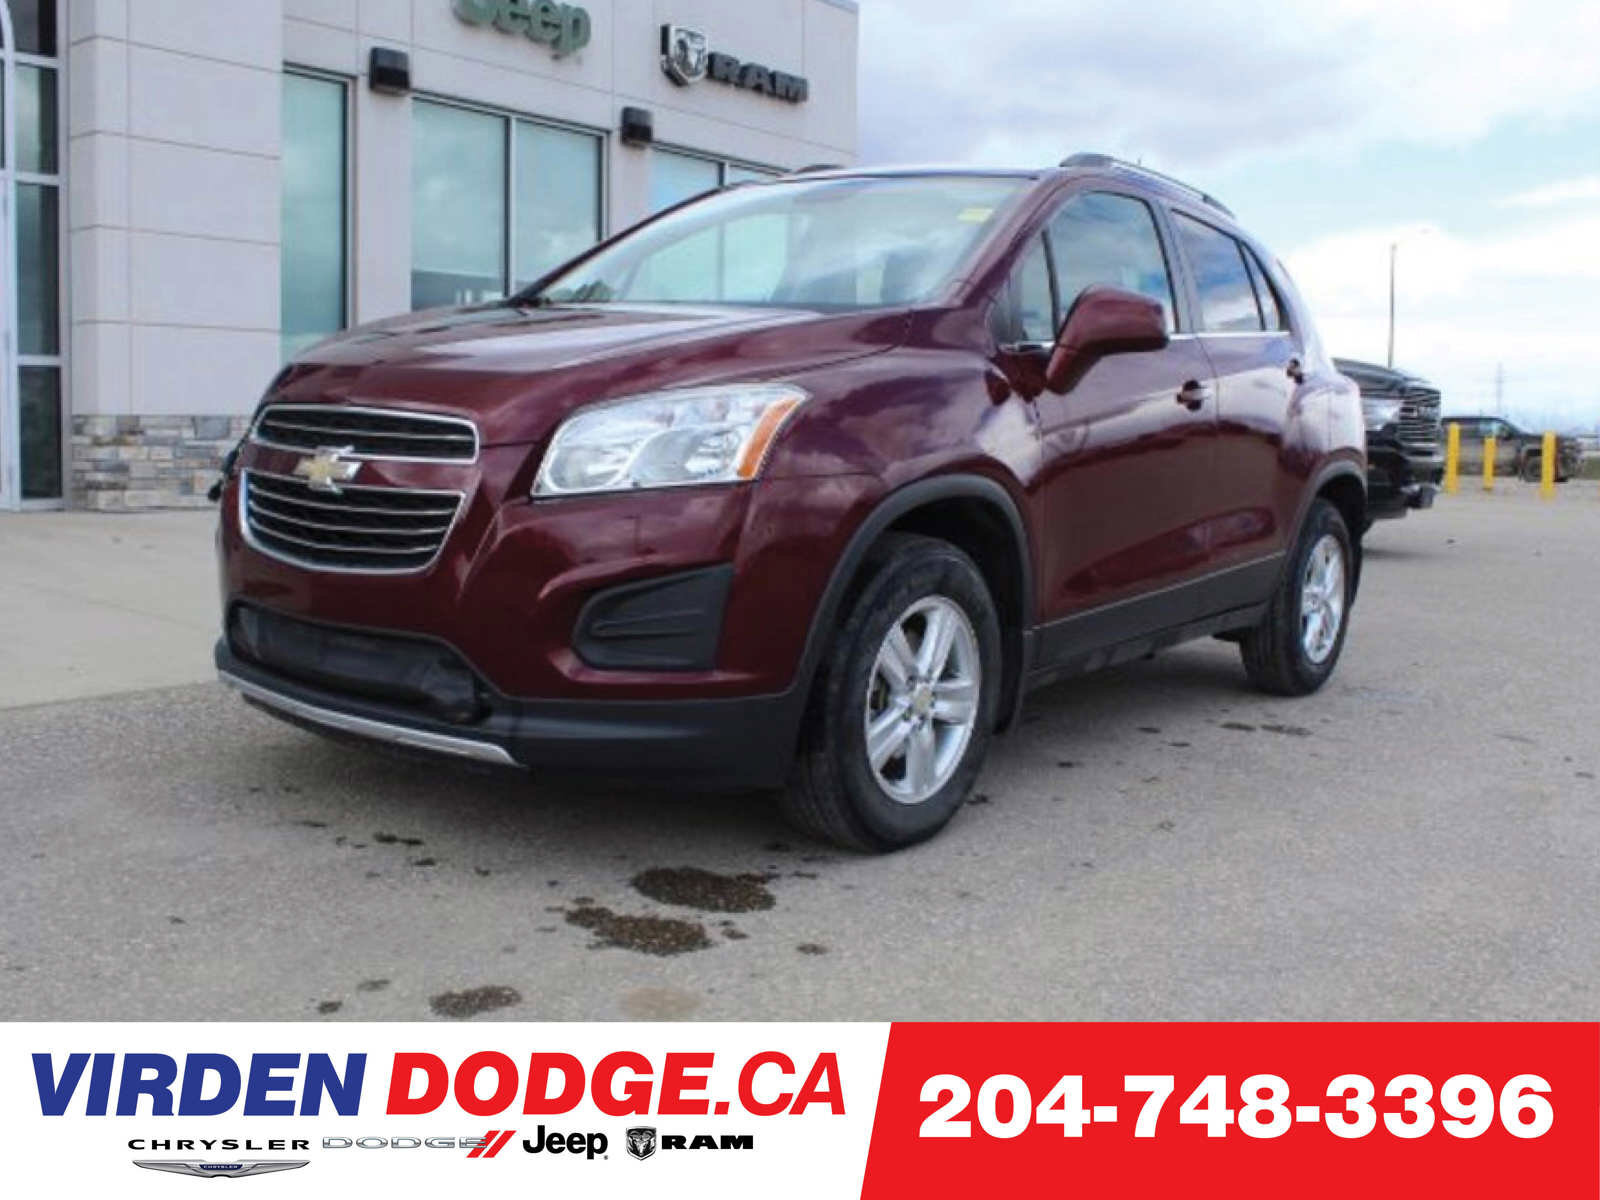 2016 Chevrolet Trax LT | LOCALLY OWNED | REARVIEW CAMERA | Red